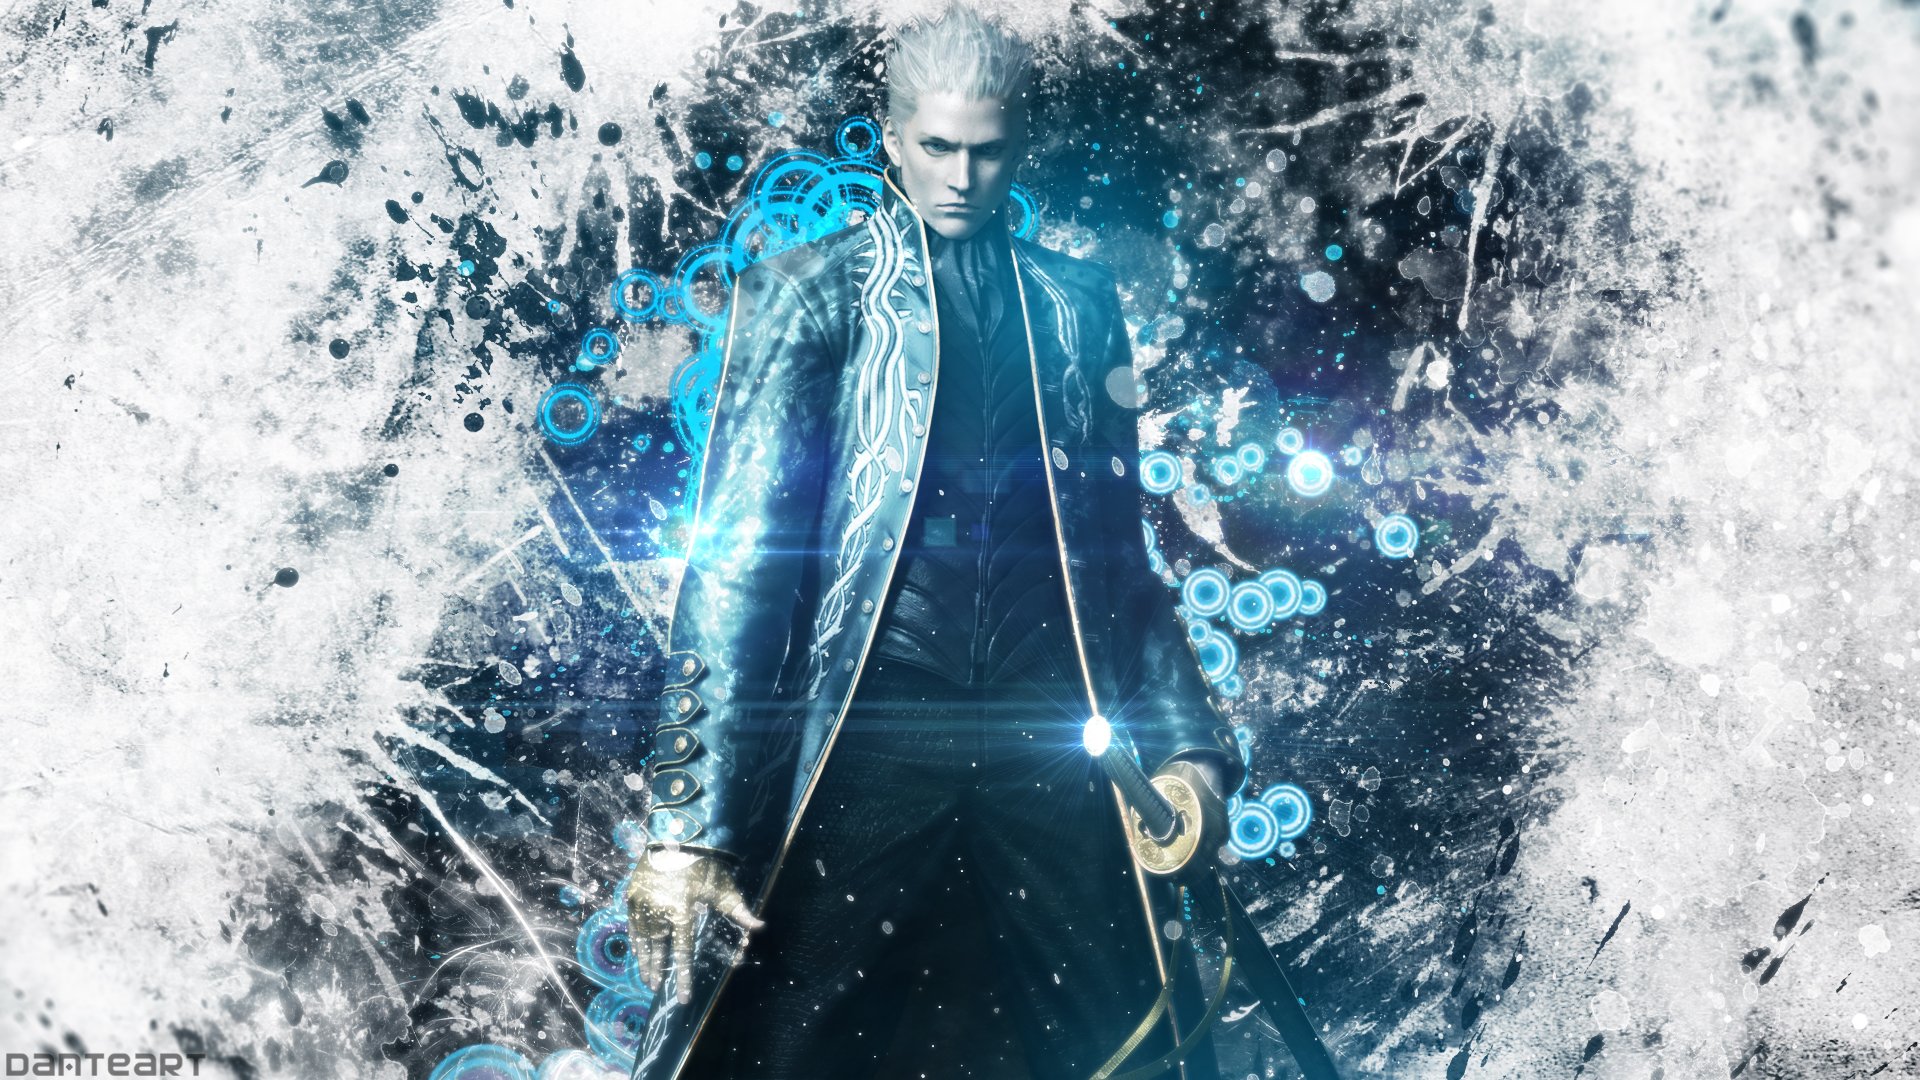 Devil May Cry 3 Vergil Wallpaper by DanteArtWallpapers